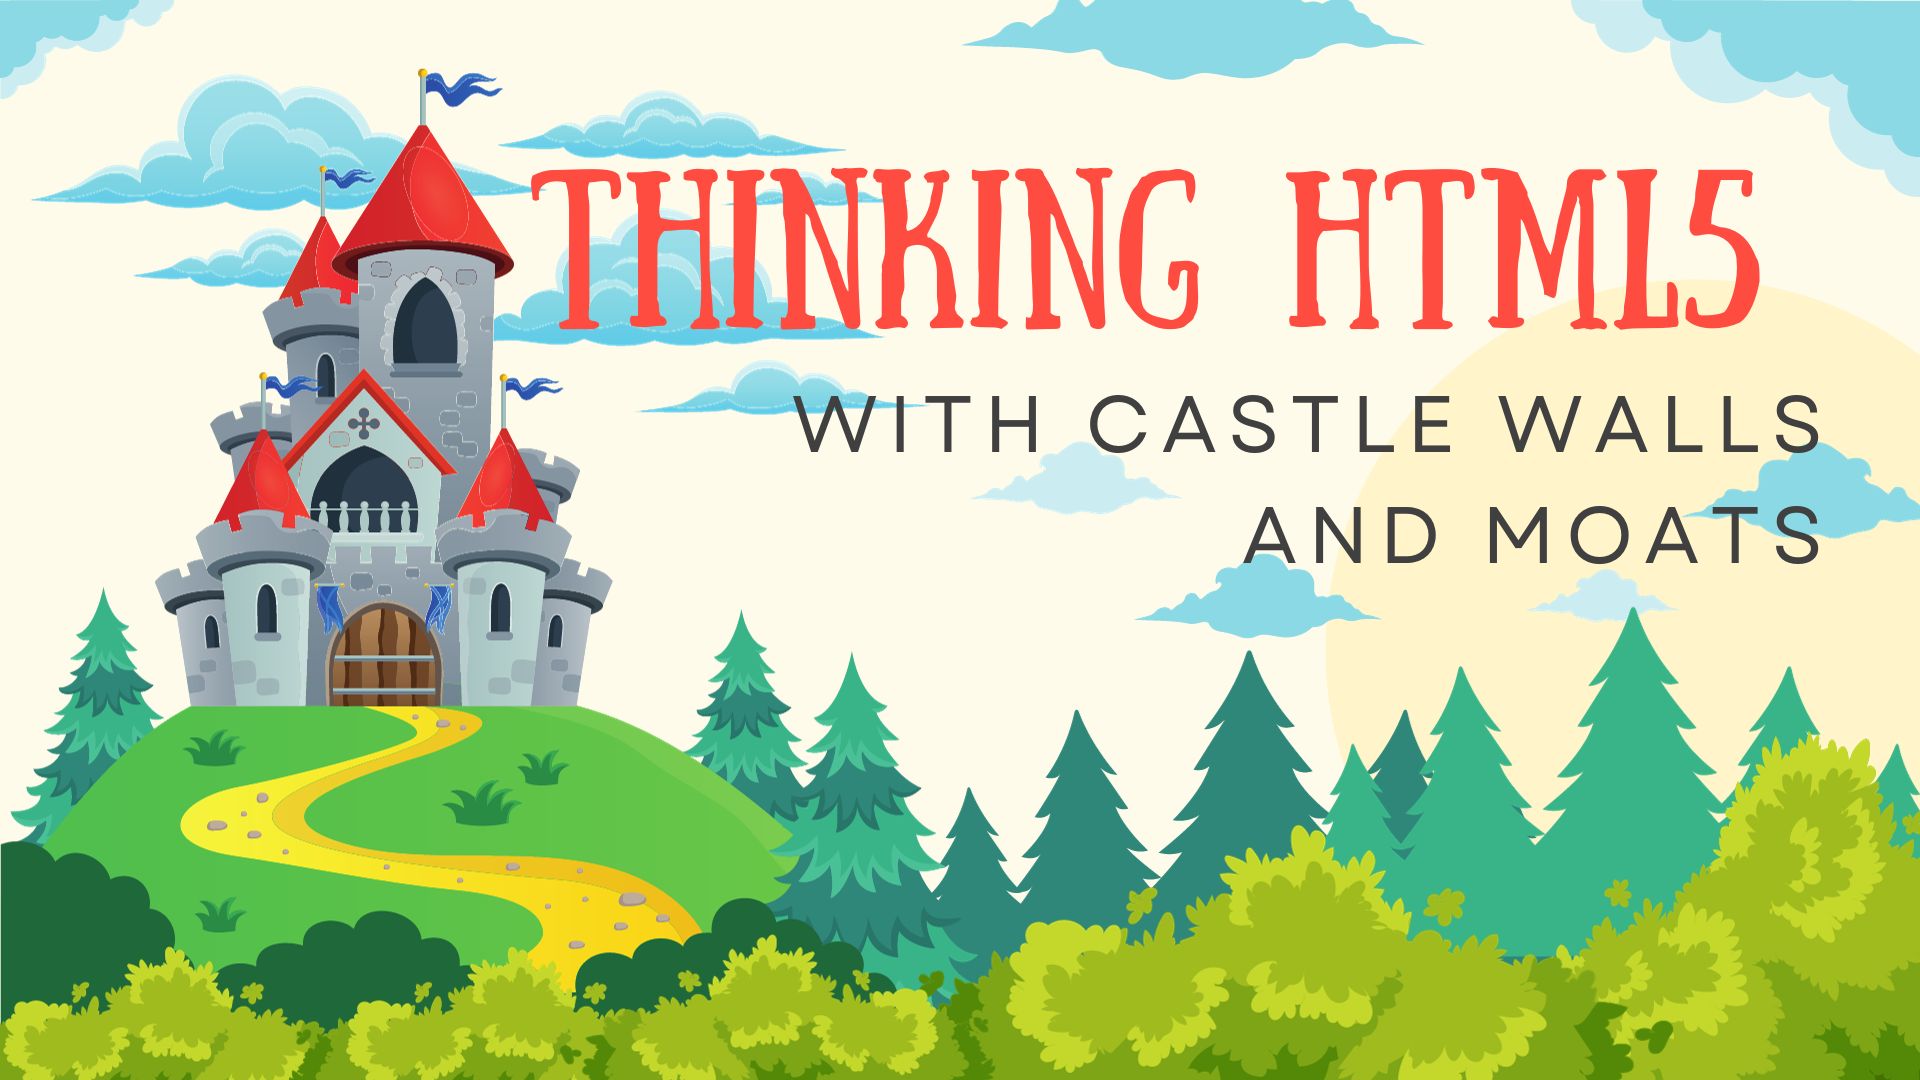 Thinking HTML5 with castle walls and moats